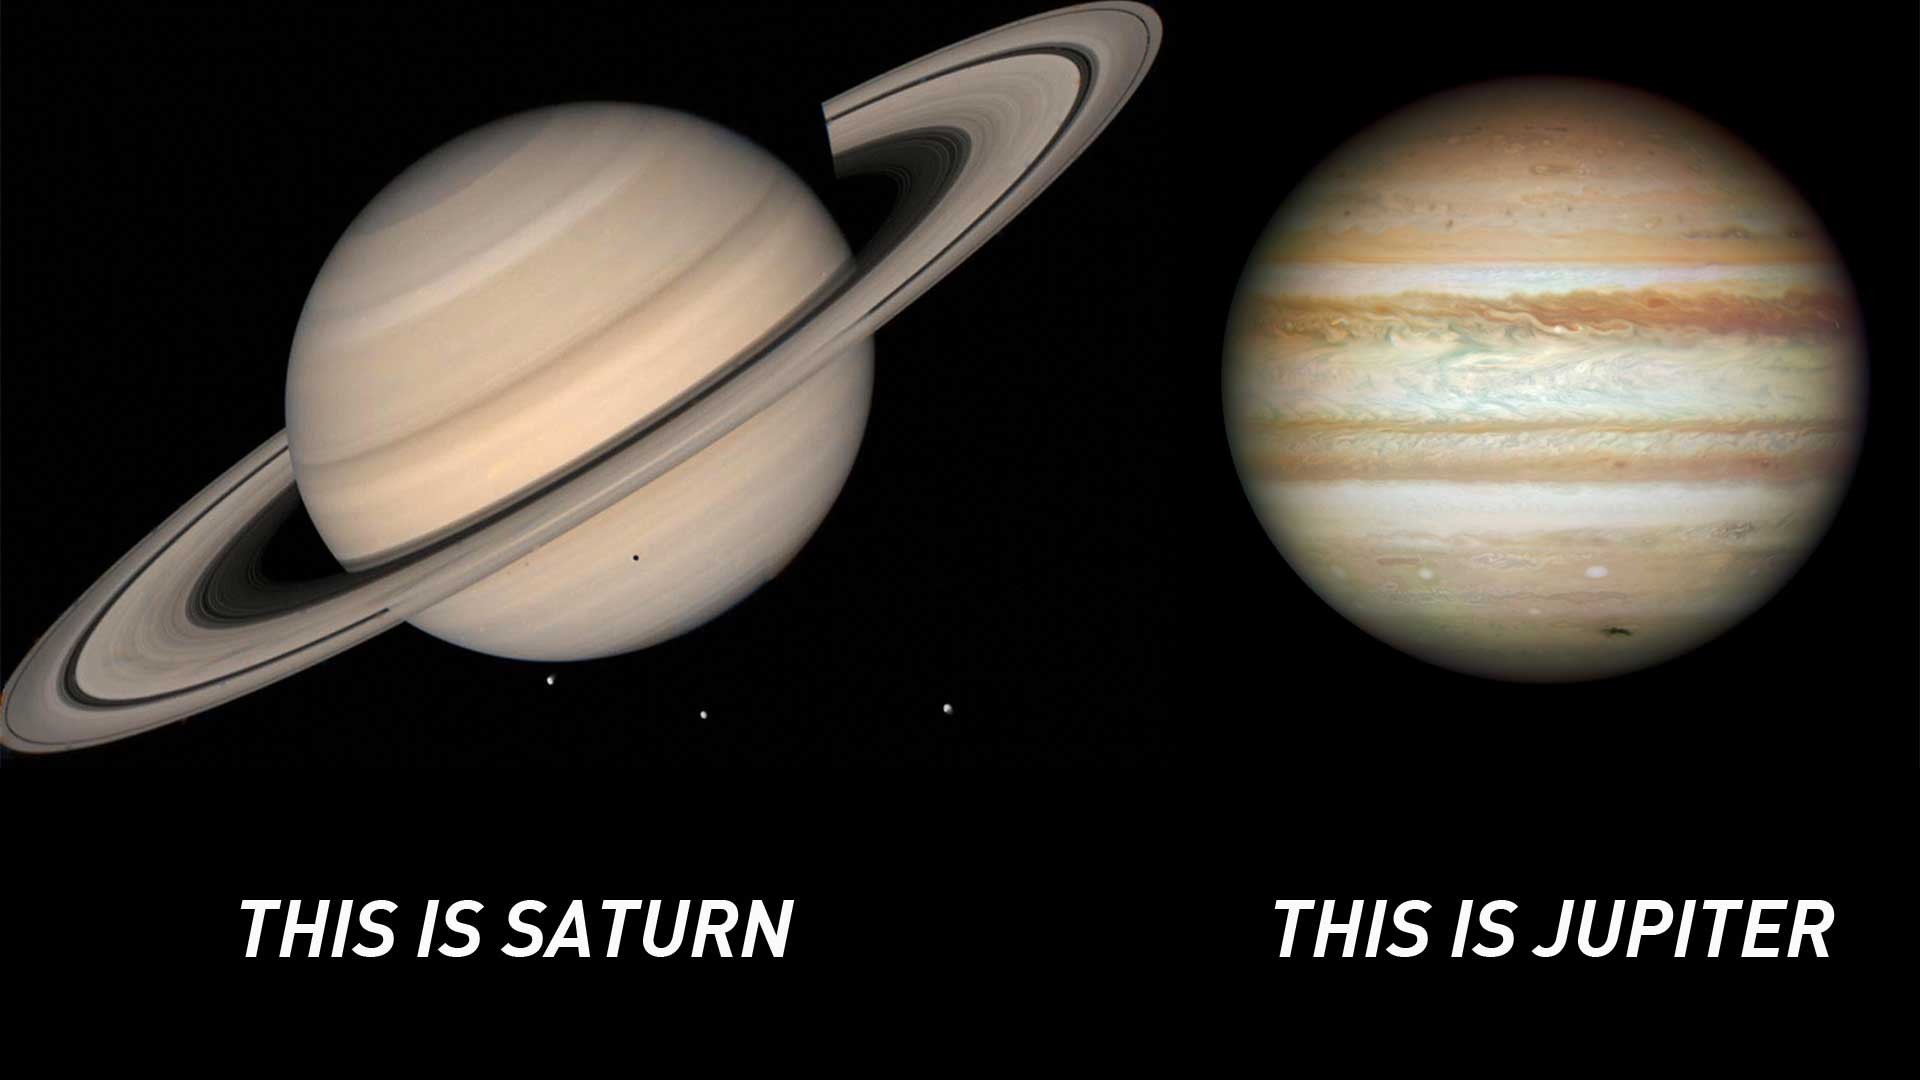 Latest Images Of Saturn And Jupiter - Saturn is so beautiful that astronome...